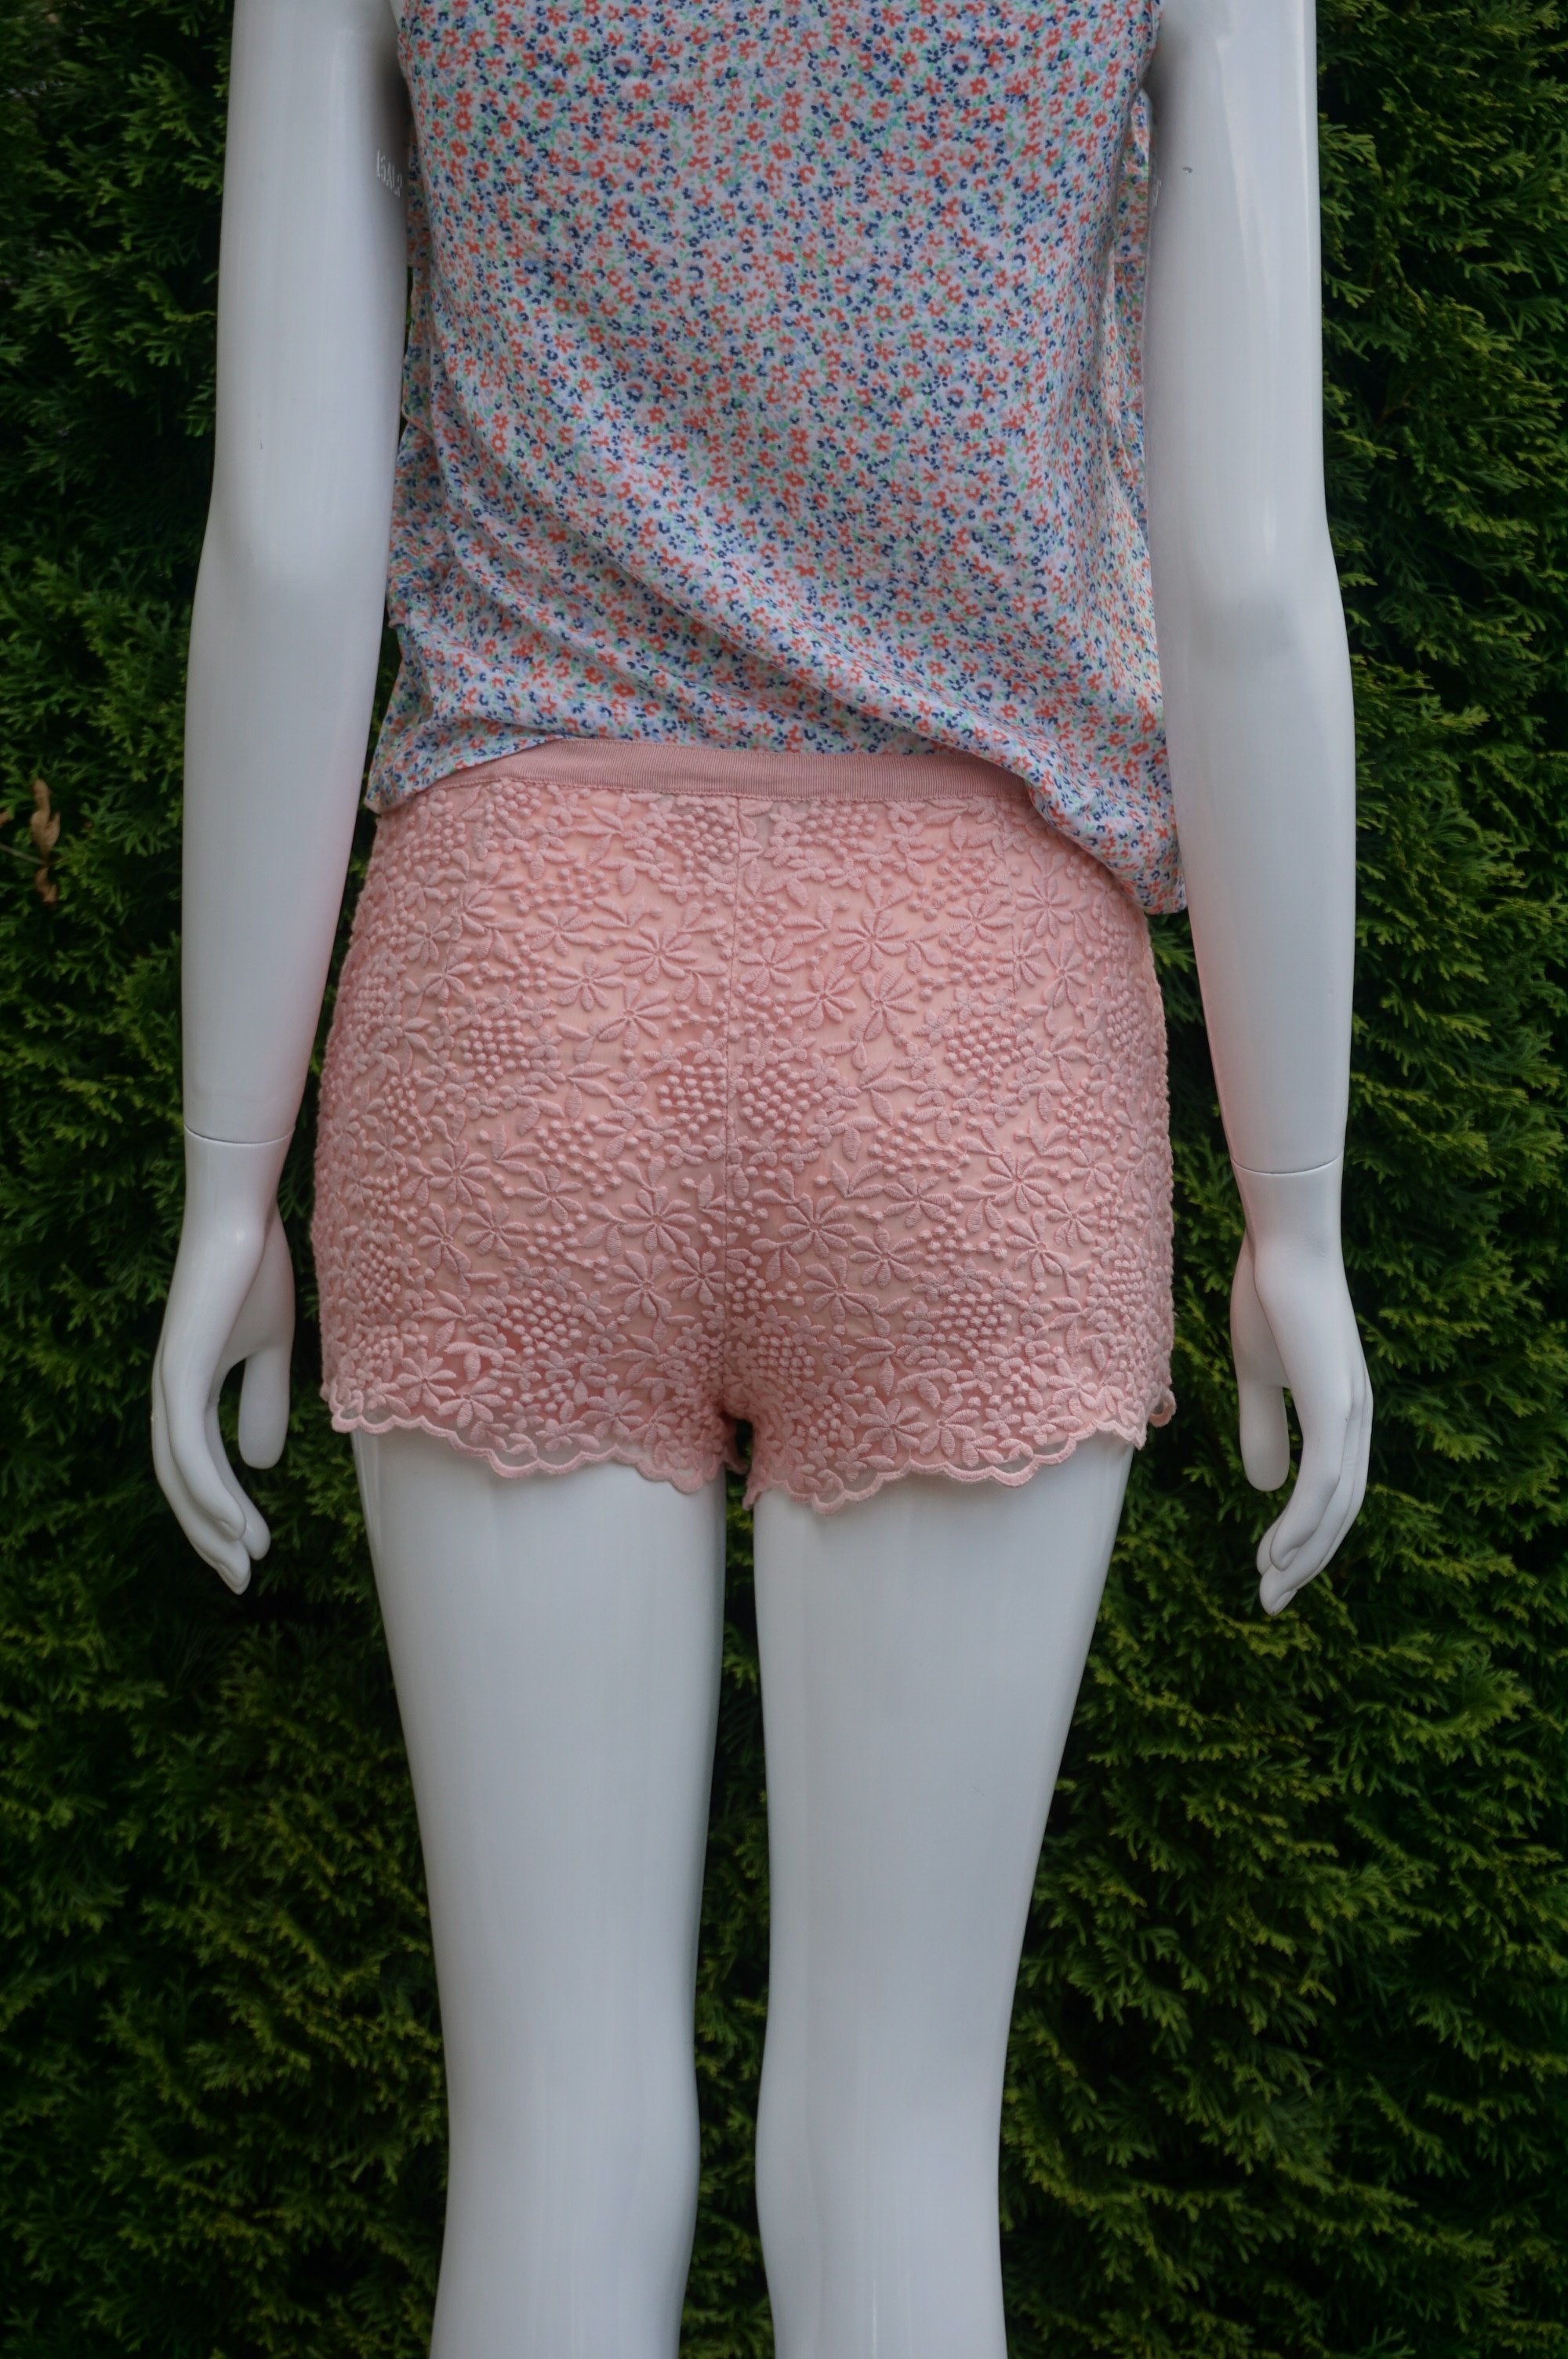 Forever 21 Pink Lace Shorts, Waist 28 inches, length 9.5 inches. Zipper on the left side, Pink, Shell, 86% cotton, 14% Nylon. Lining: 100% Polyester, women's Skirts & Shorts, women's Pink Skirts & Shorts, Forever 21 women's Skirts & Shorts, lace shorts, cute summer shorts